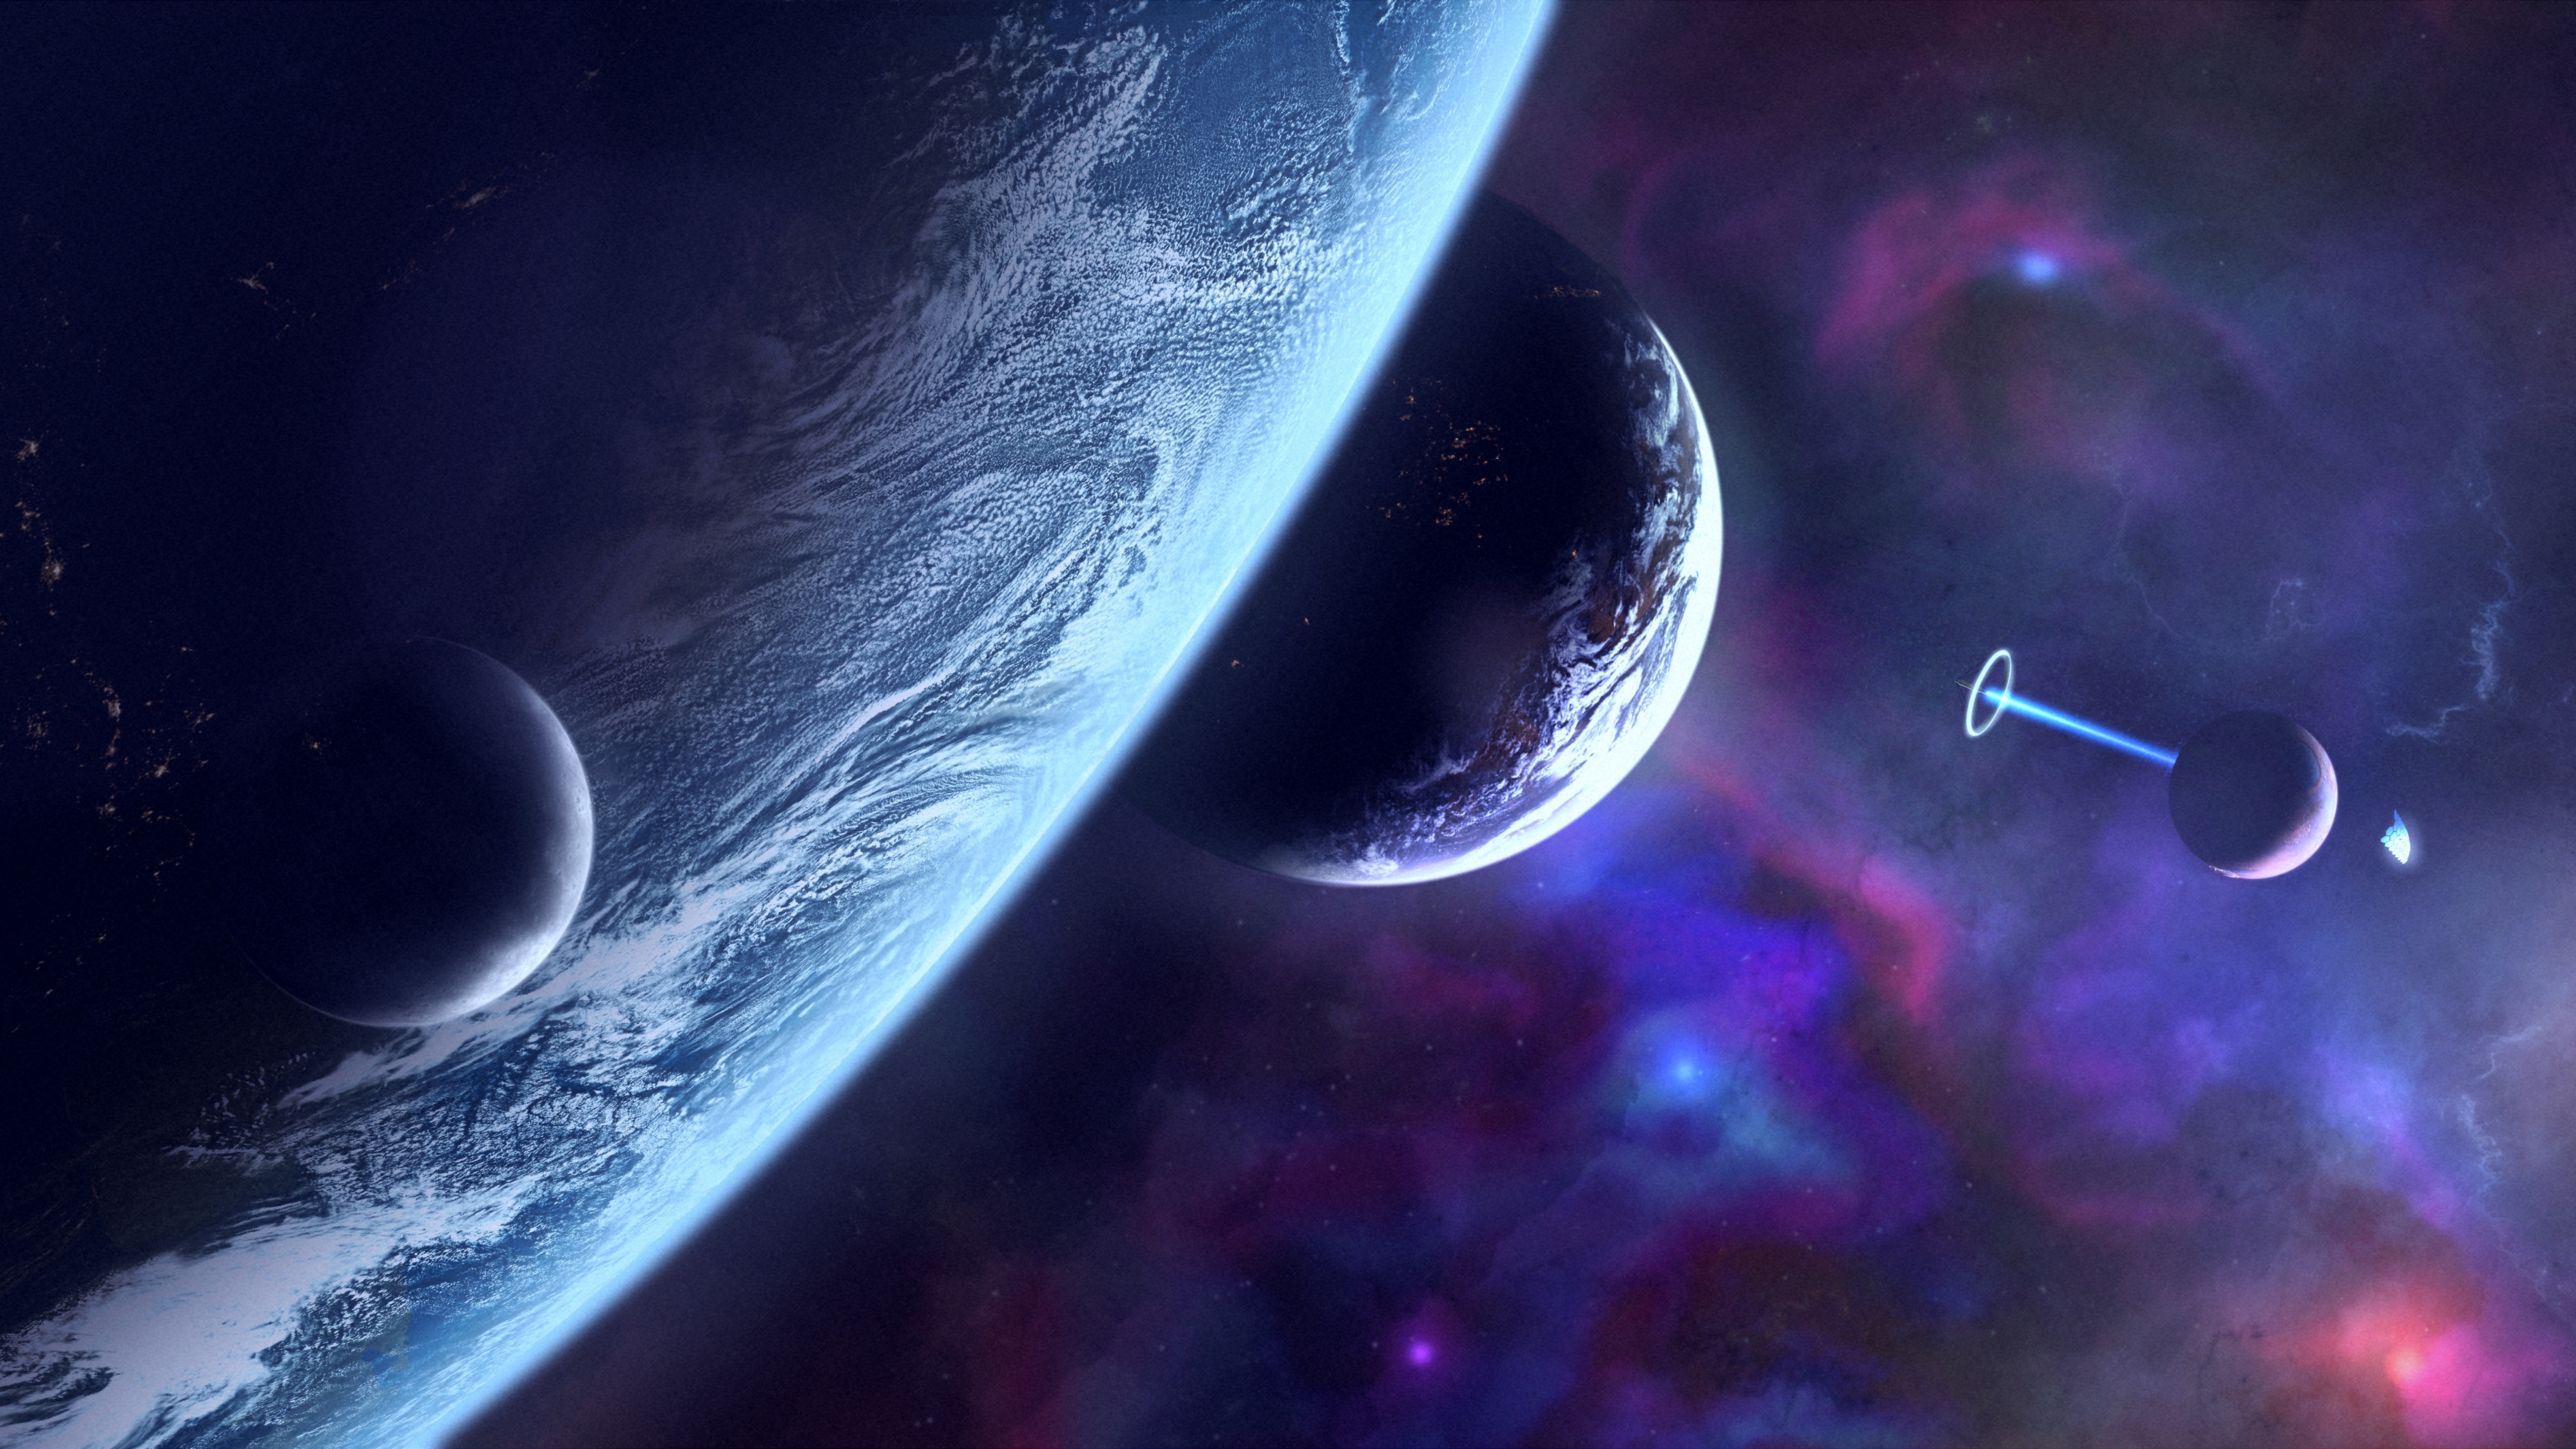 Purple space planet abstract HD wallpaper download